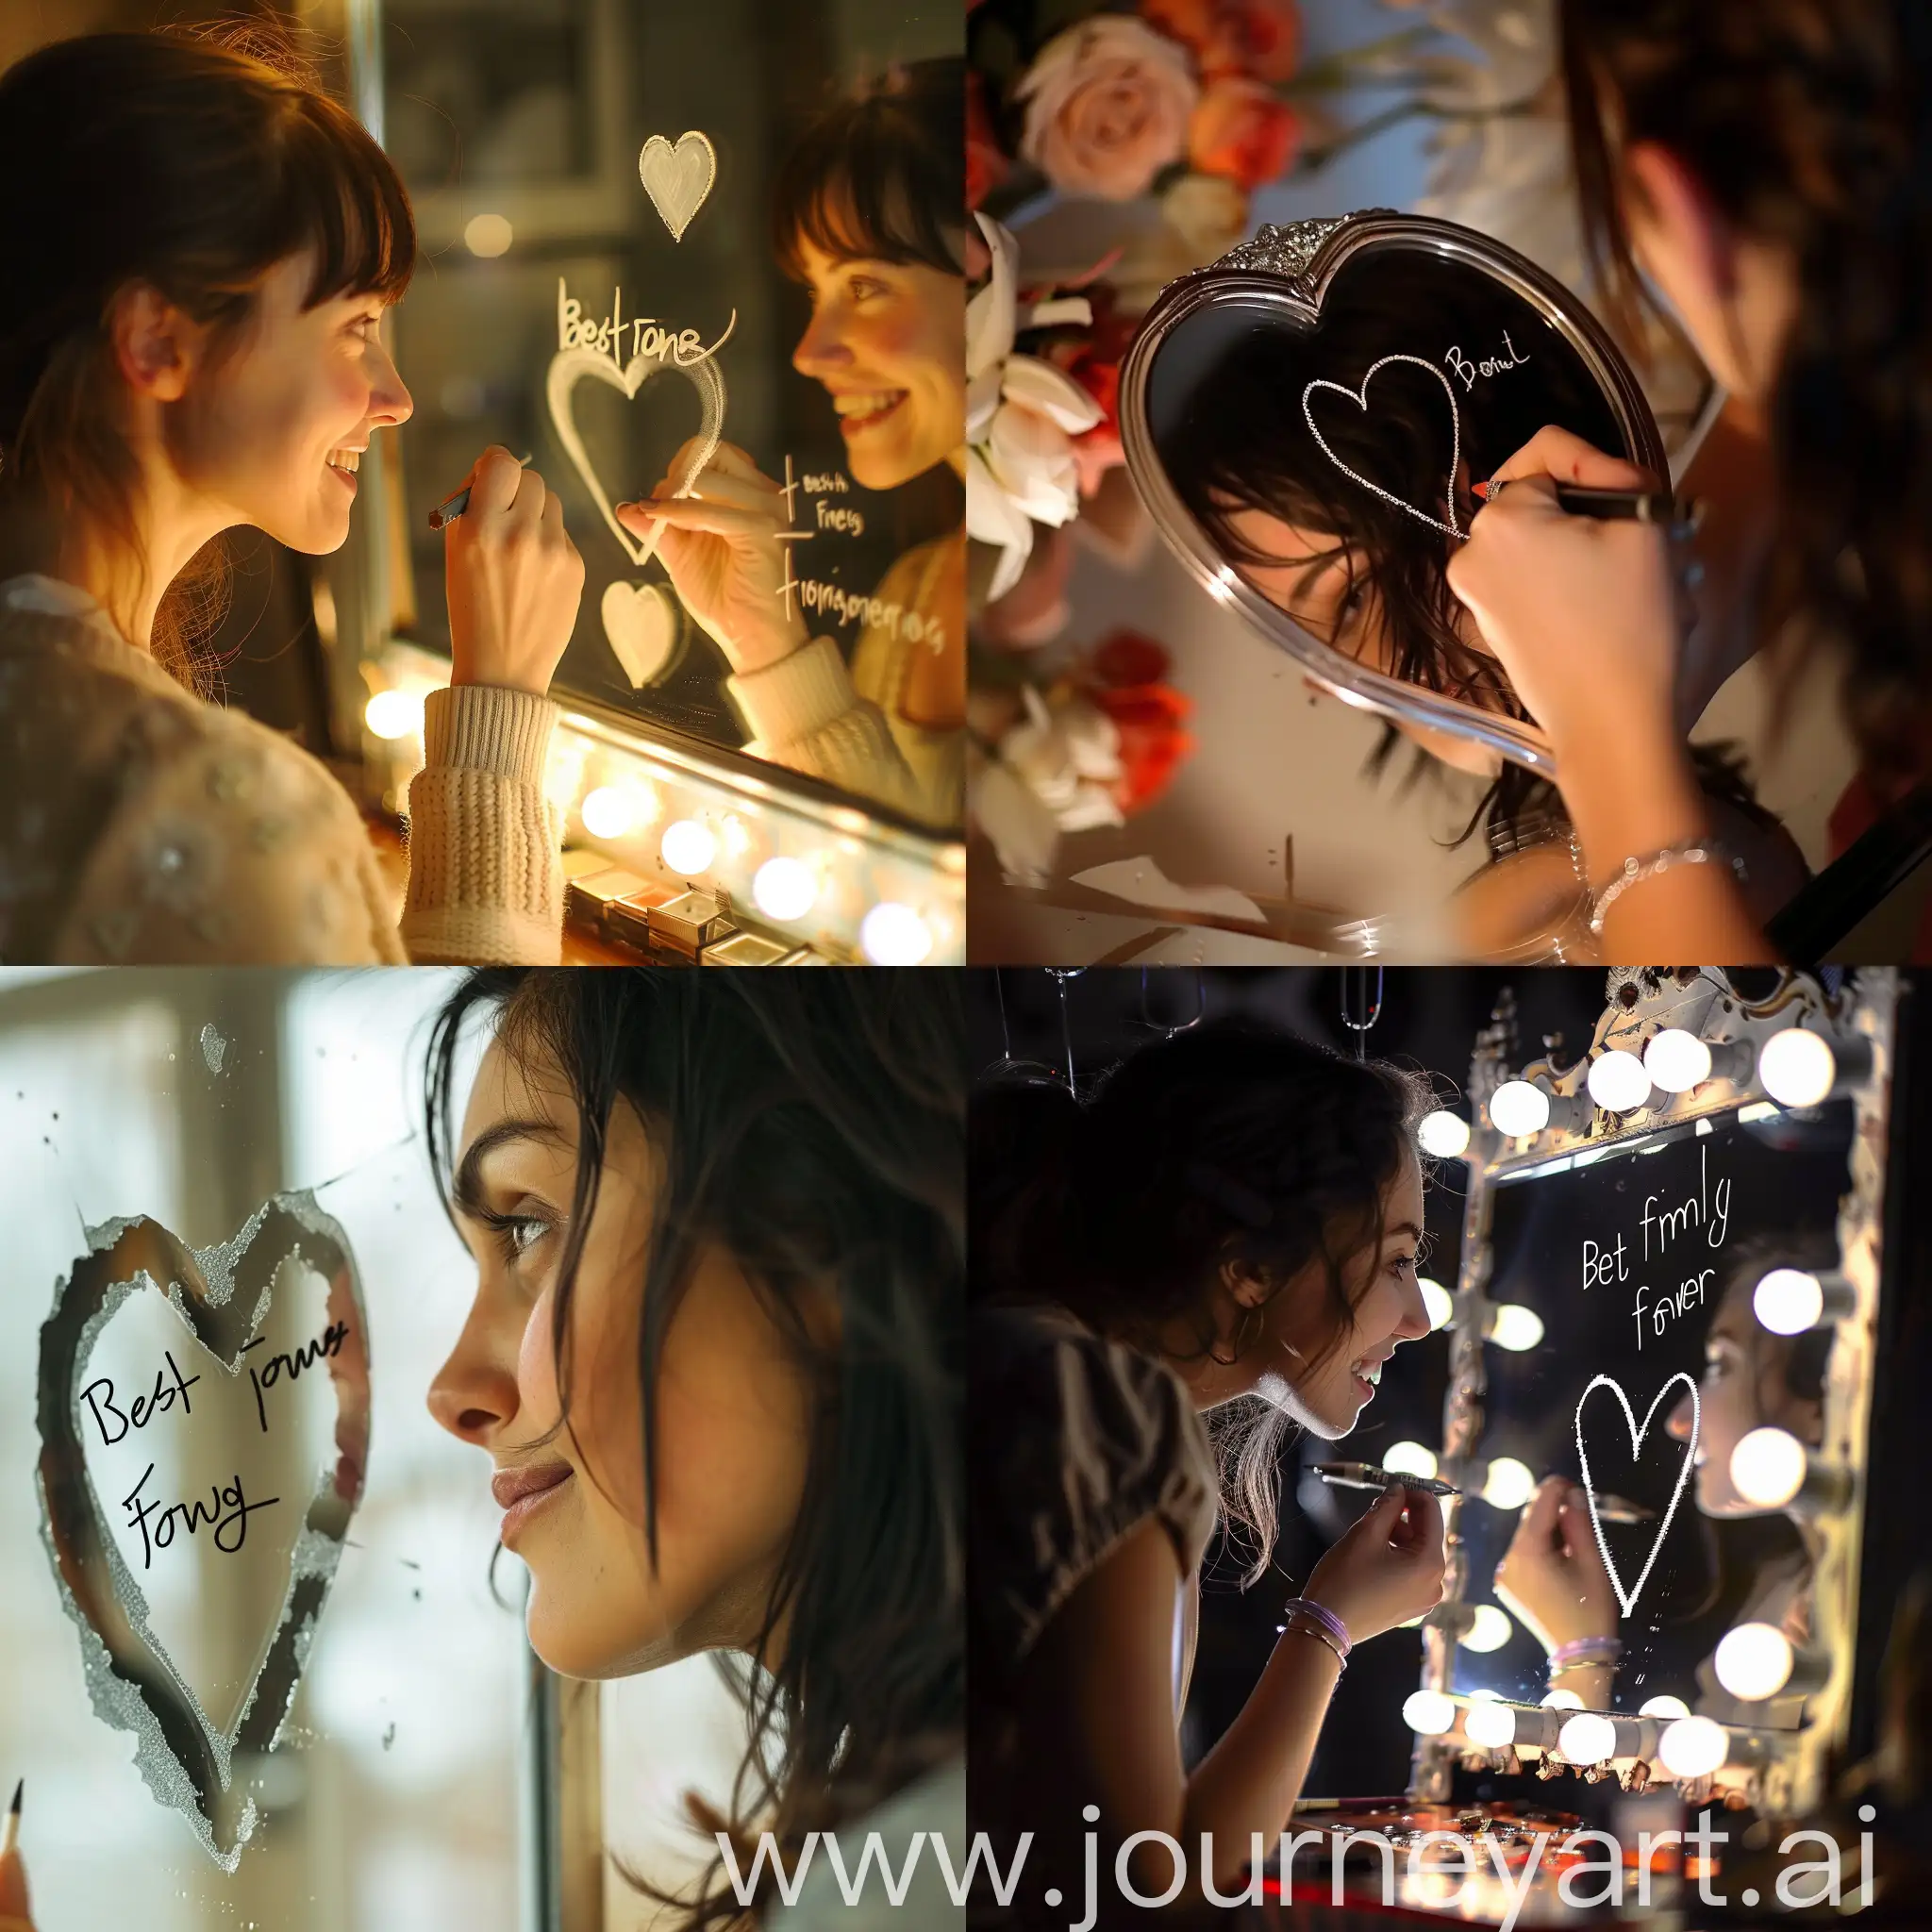 Woman-Drawing-Heart-on-Mirror-with-Best-Friend-Forever-Message